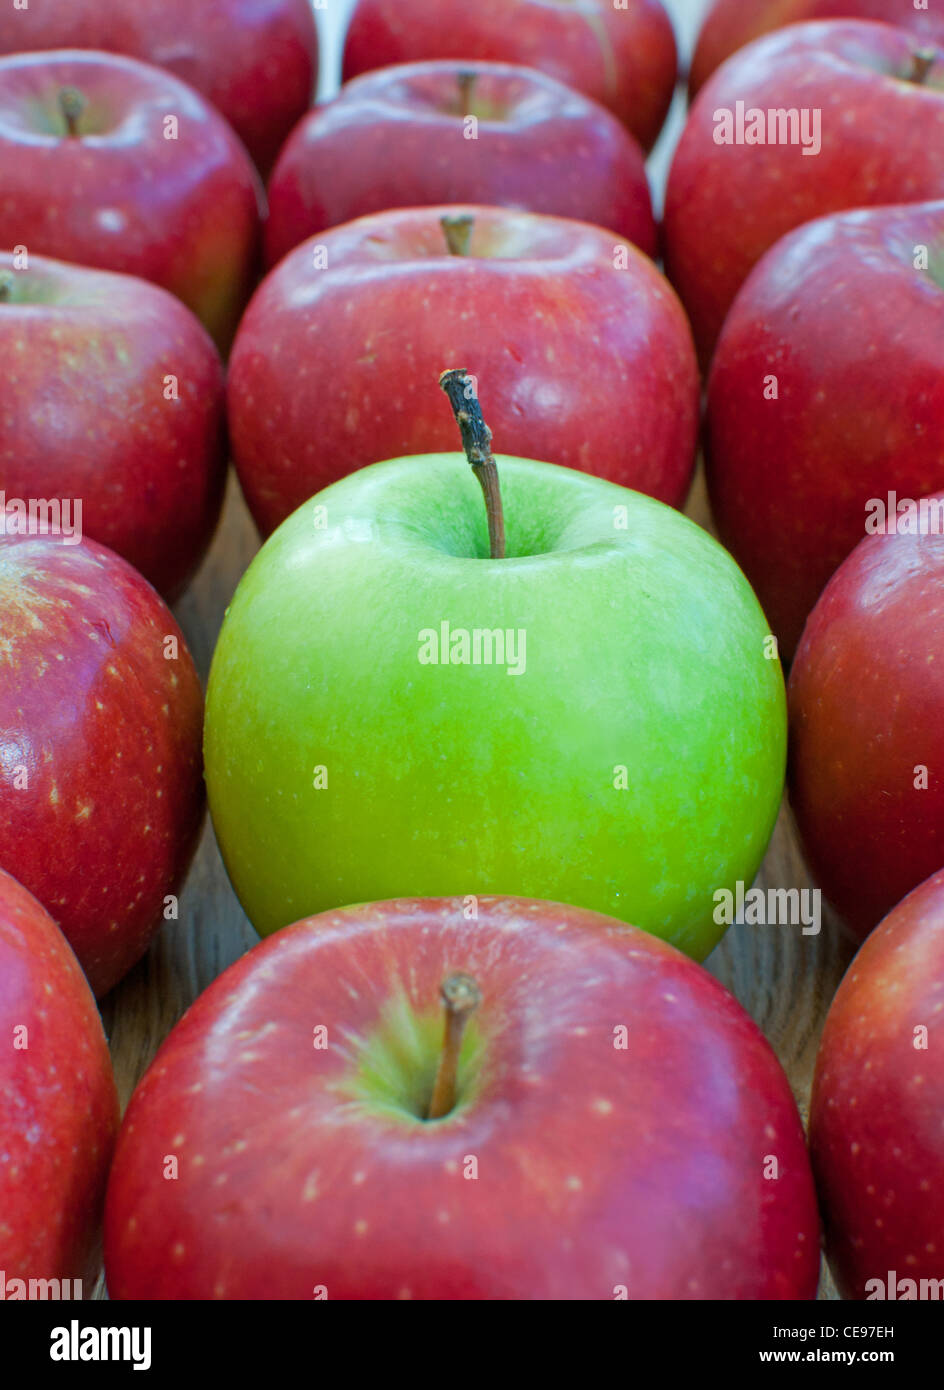 Single green apple standing out amongst many red apples Stock Photo